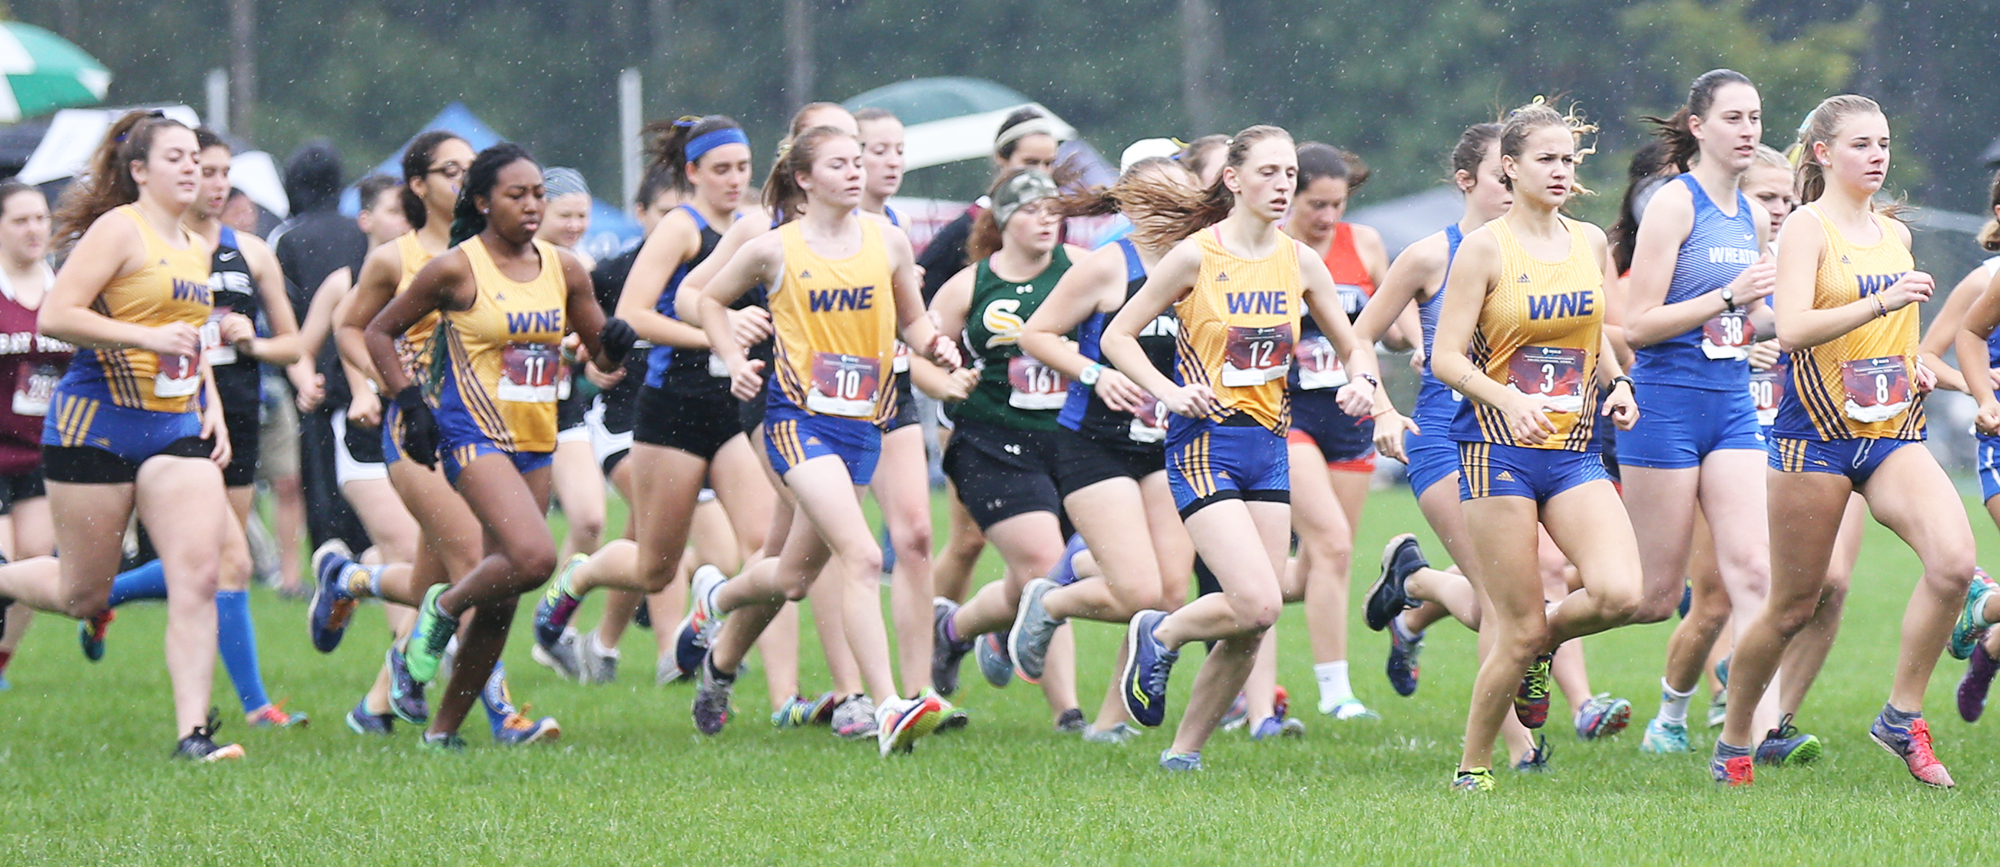 Western New England finished sixth in the eight-team field at the CCC Championship on Saturday. (Photo by Chris Marion)